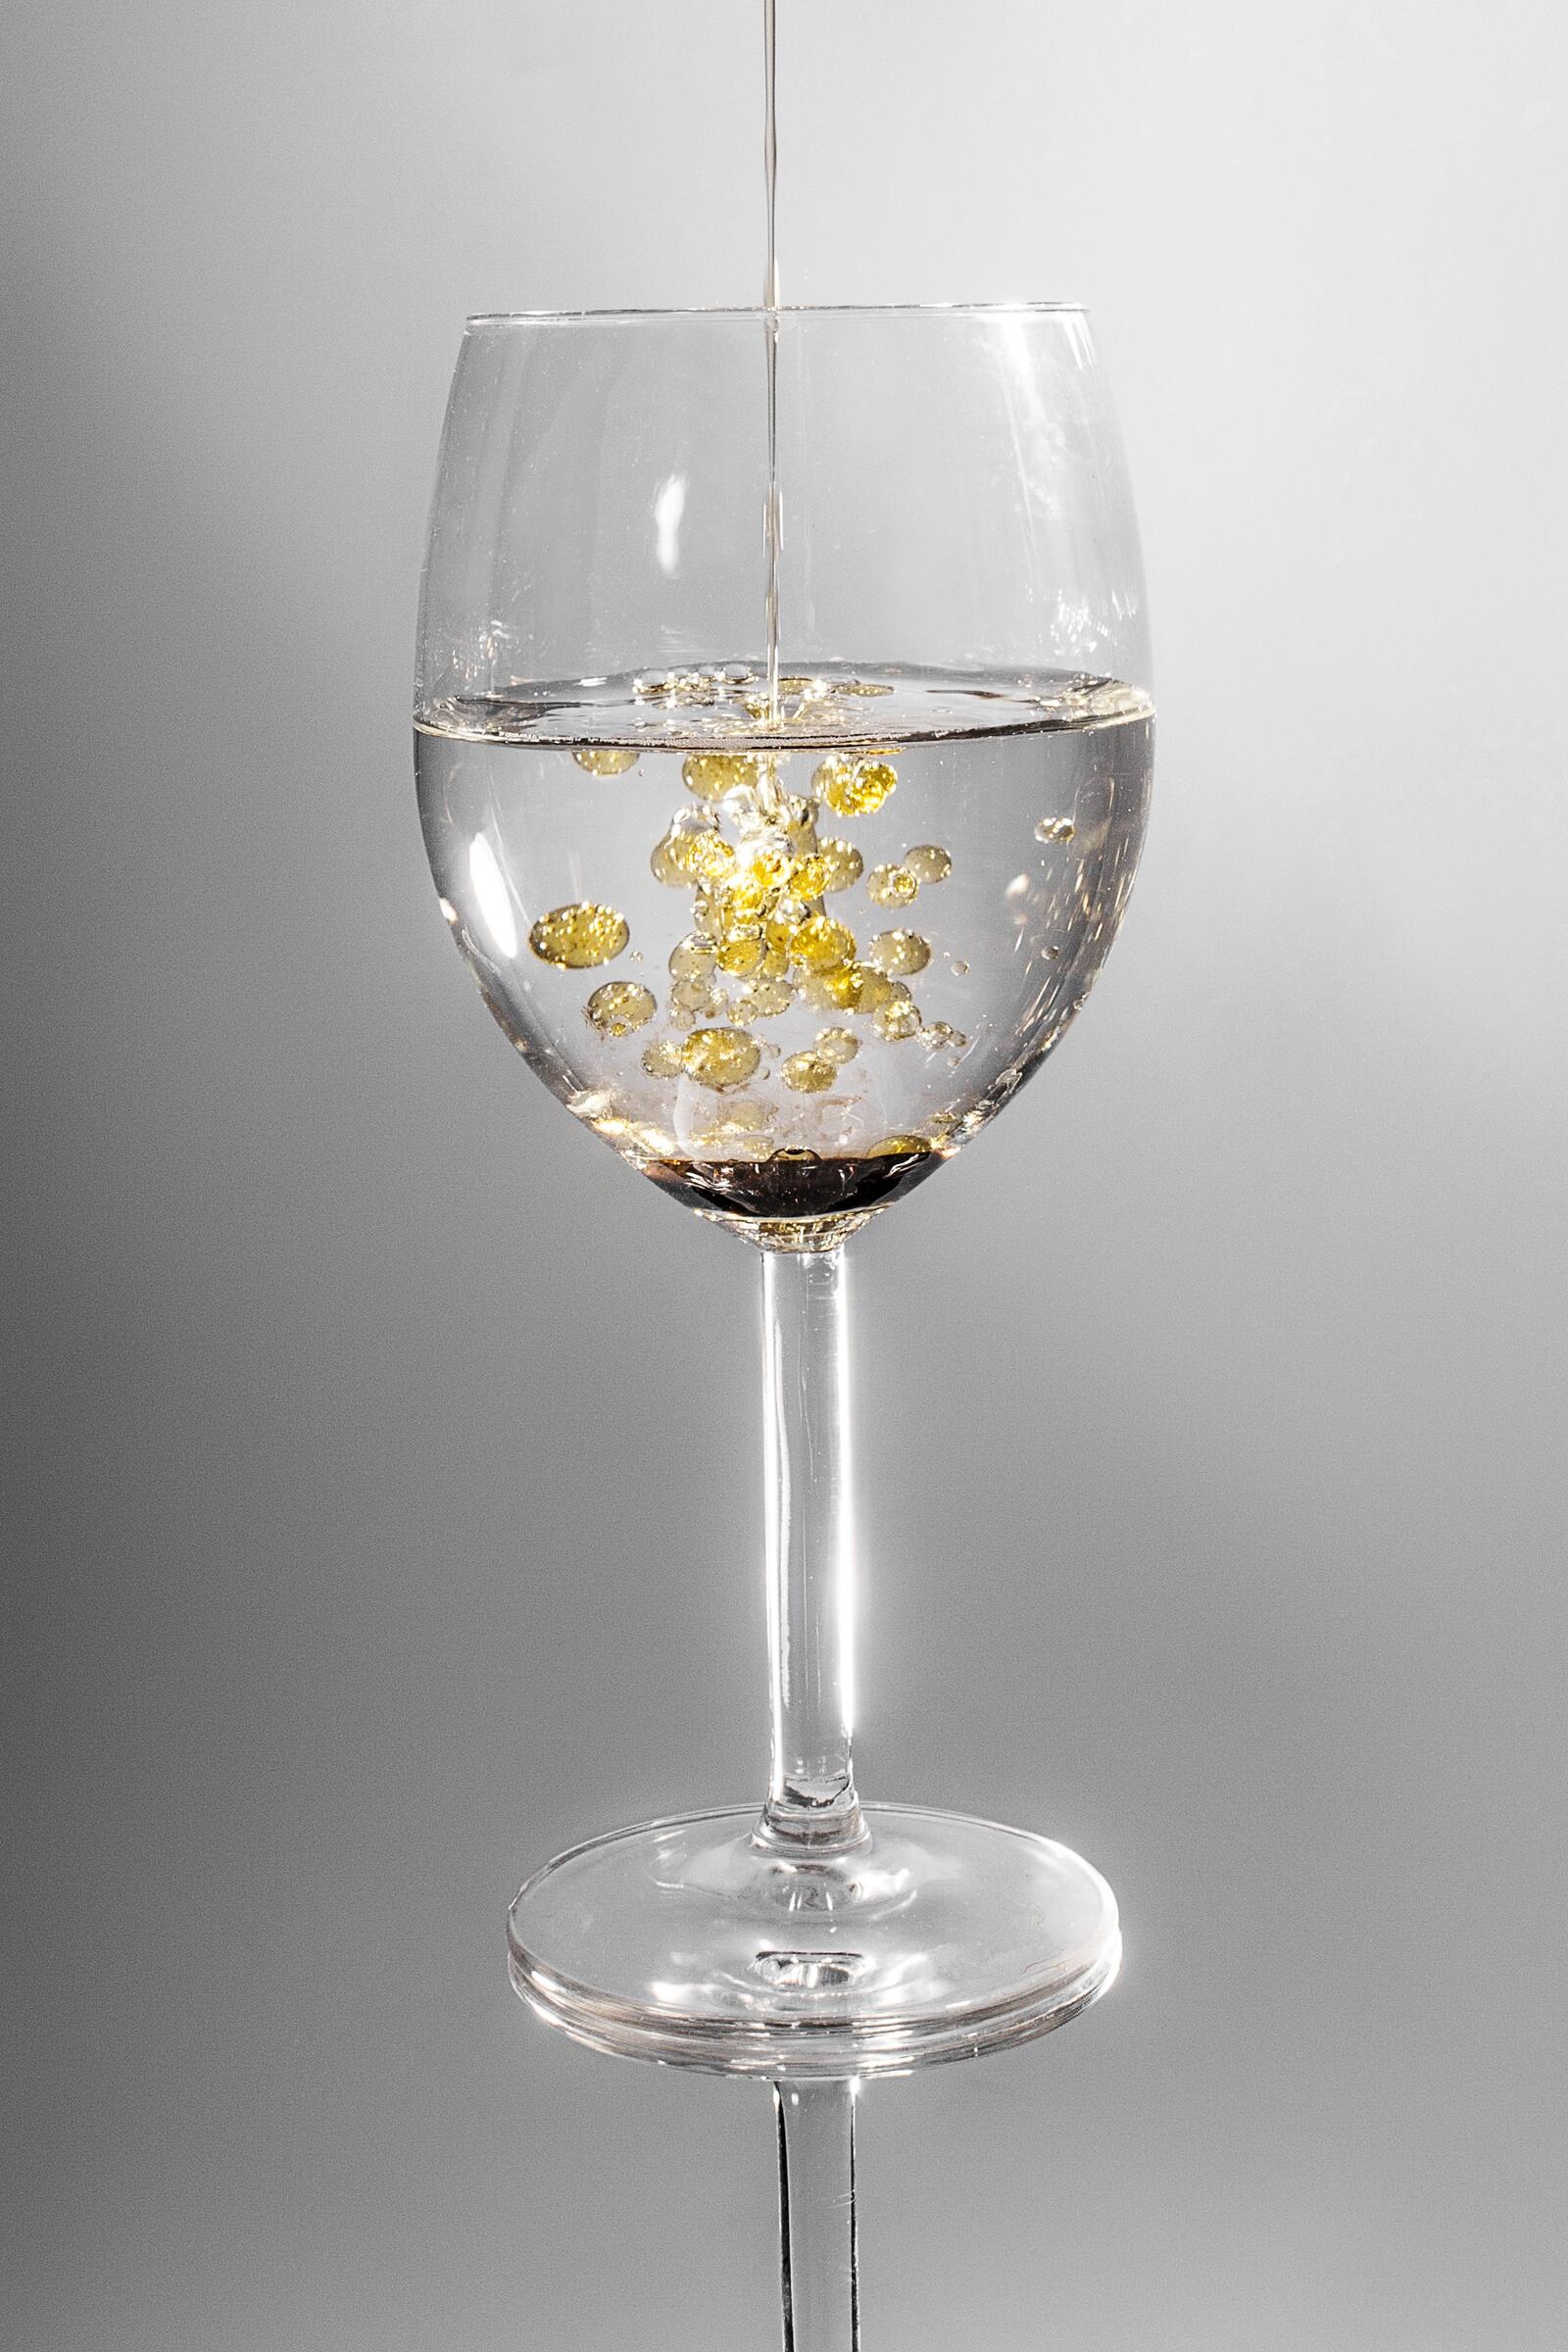 Free photo A glass with clear liquid and drops of oil